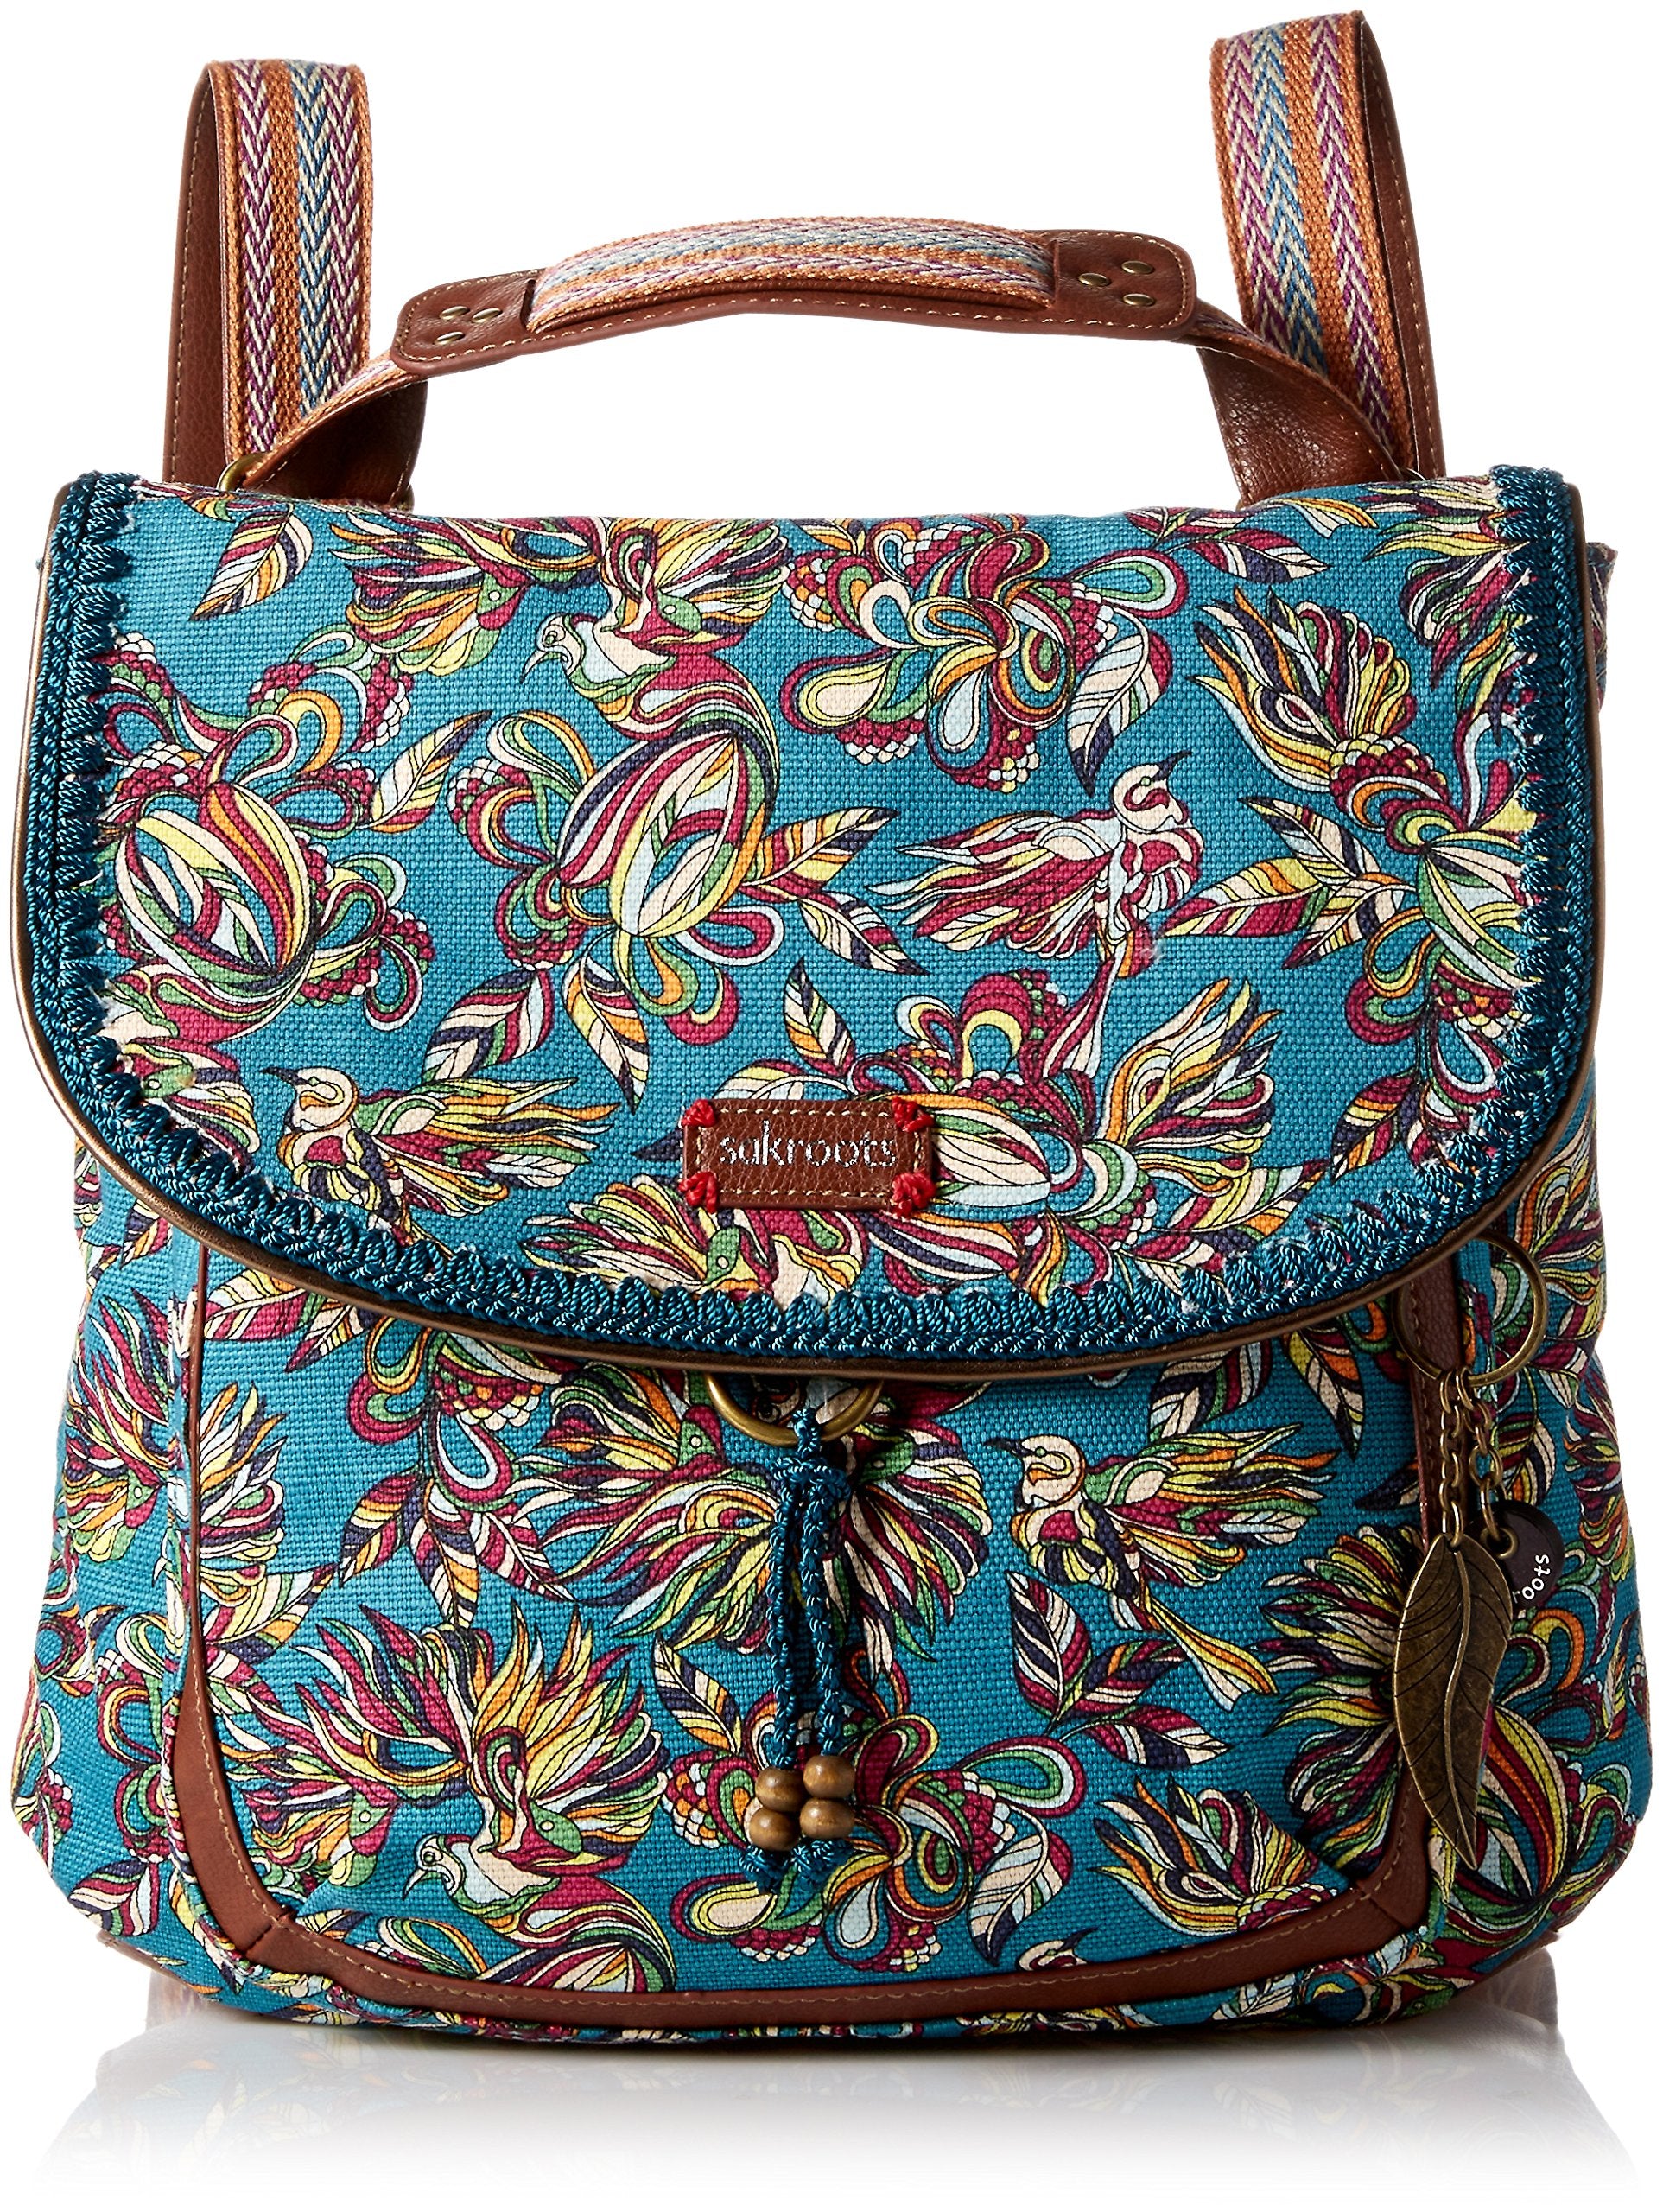 Sakroots Royal Midnight Seascape Twill Loyola Small Convertible Backpack  Purse | eBay